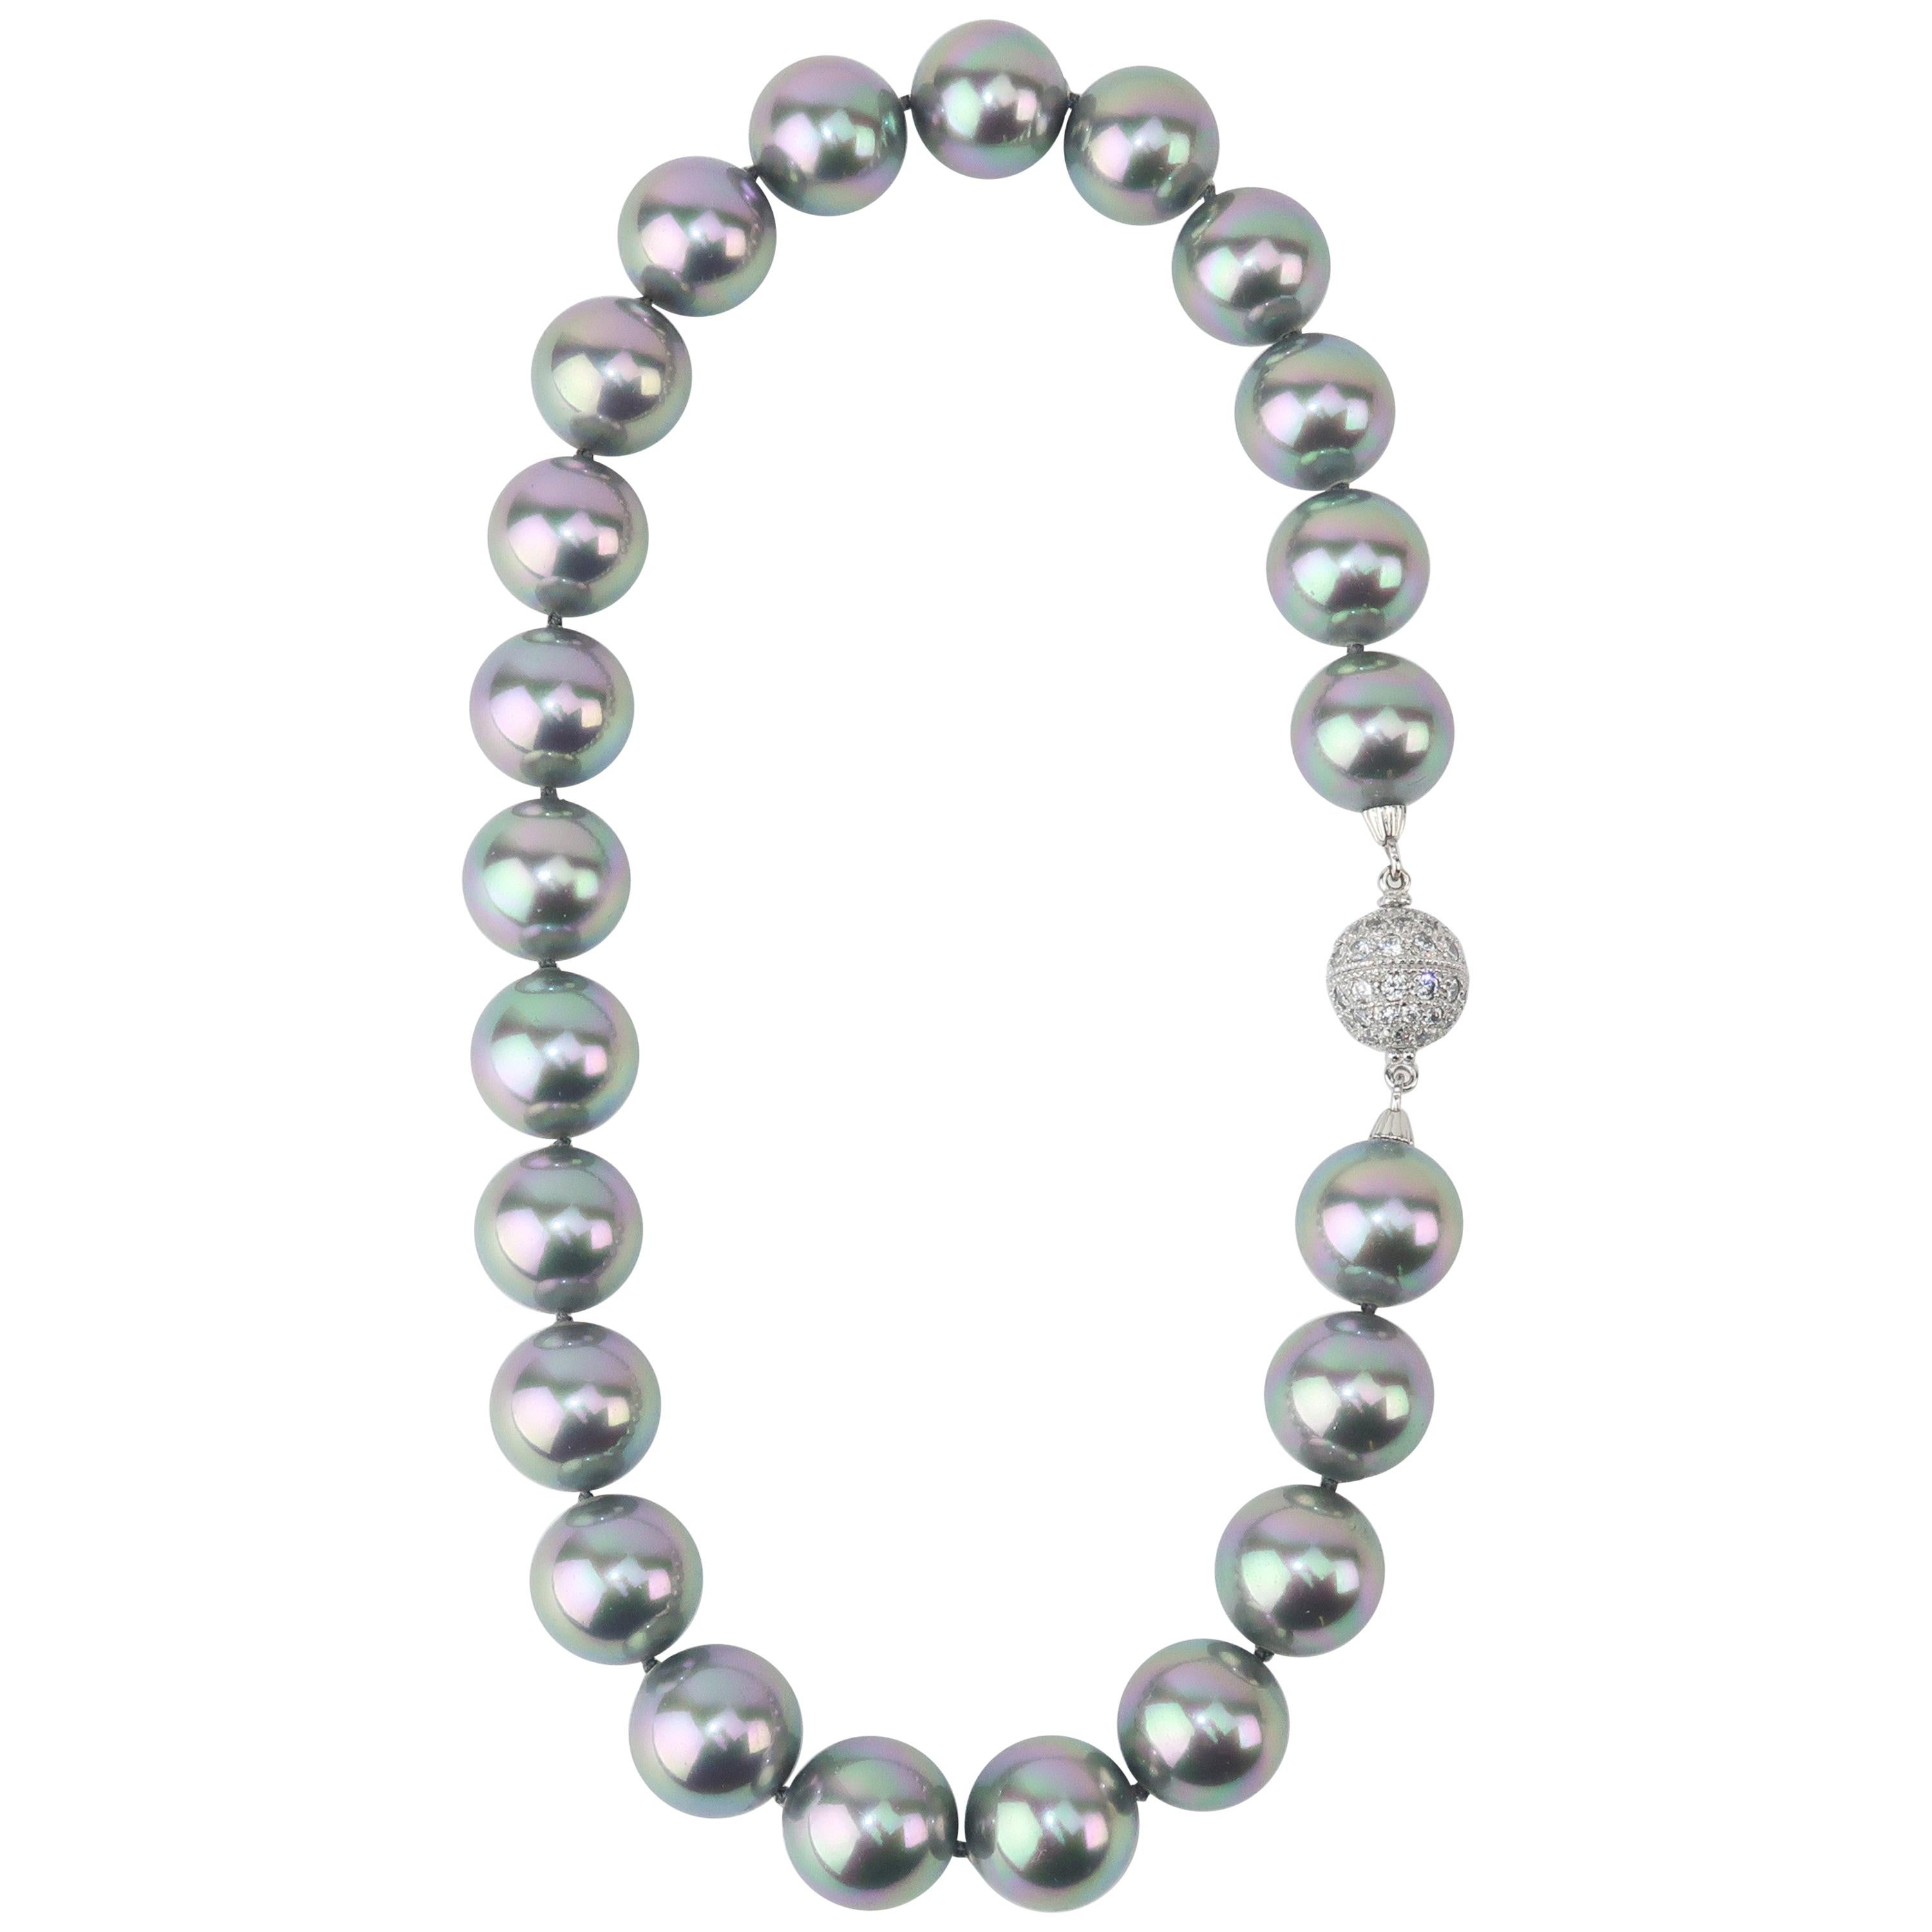 Faux Gray Pearl Choker Necklace With Rhinestone Closure For Sale